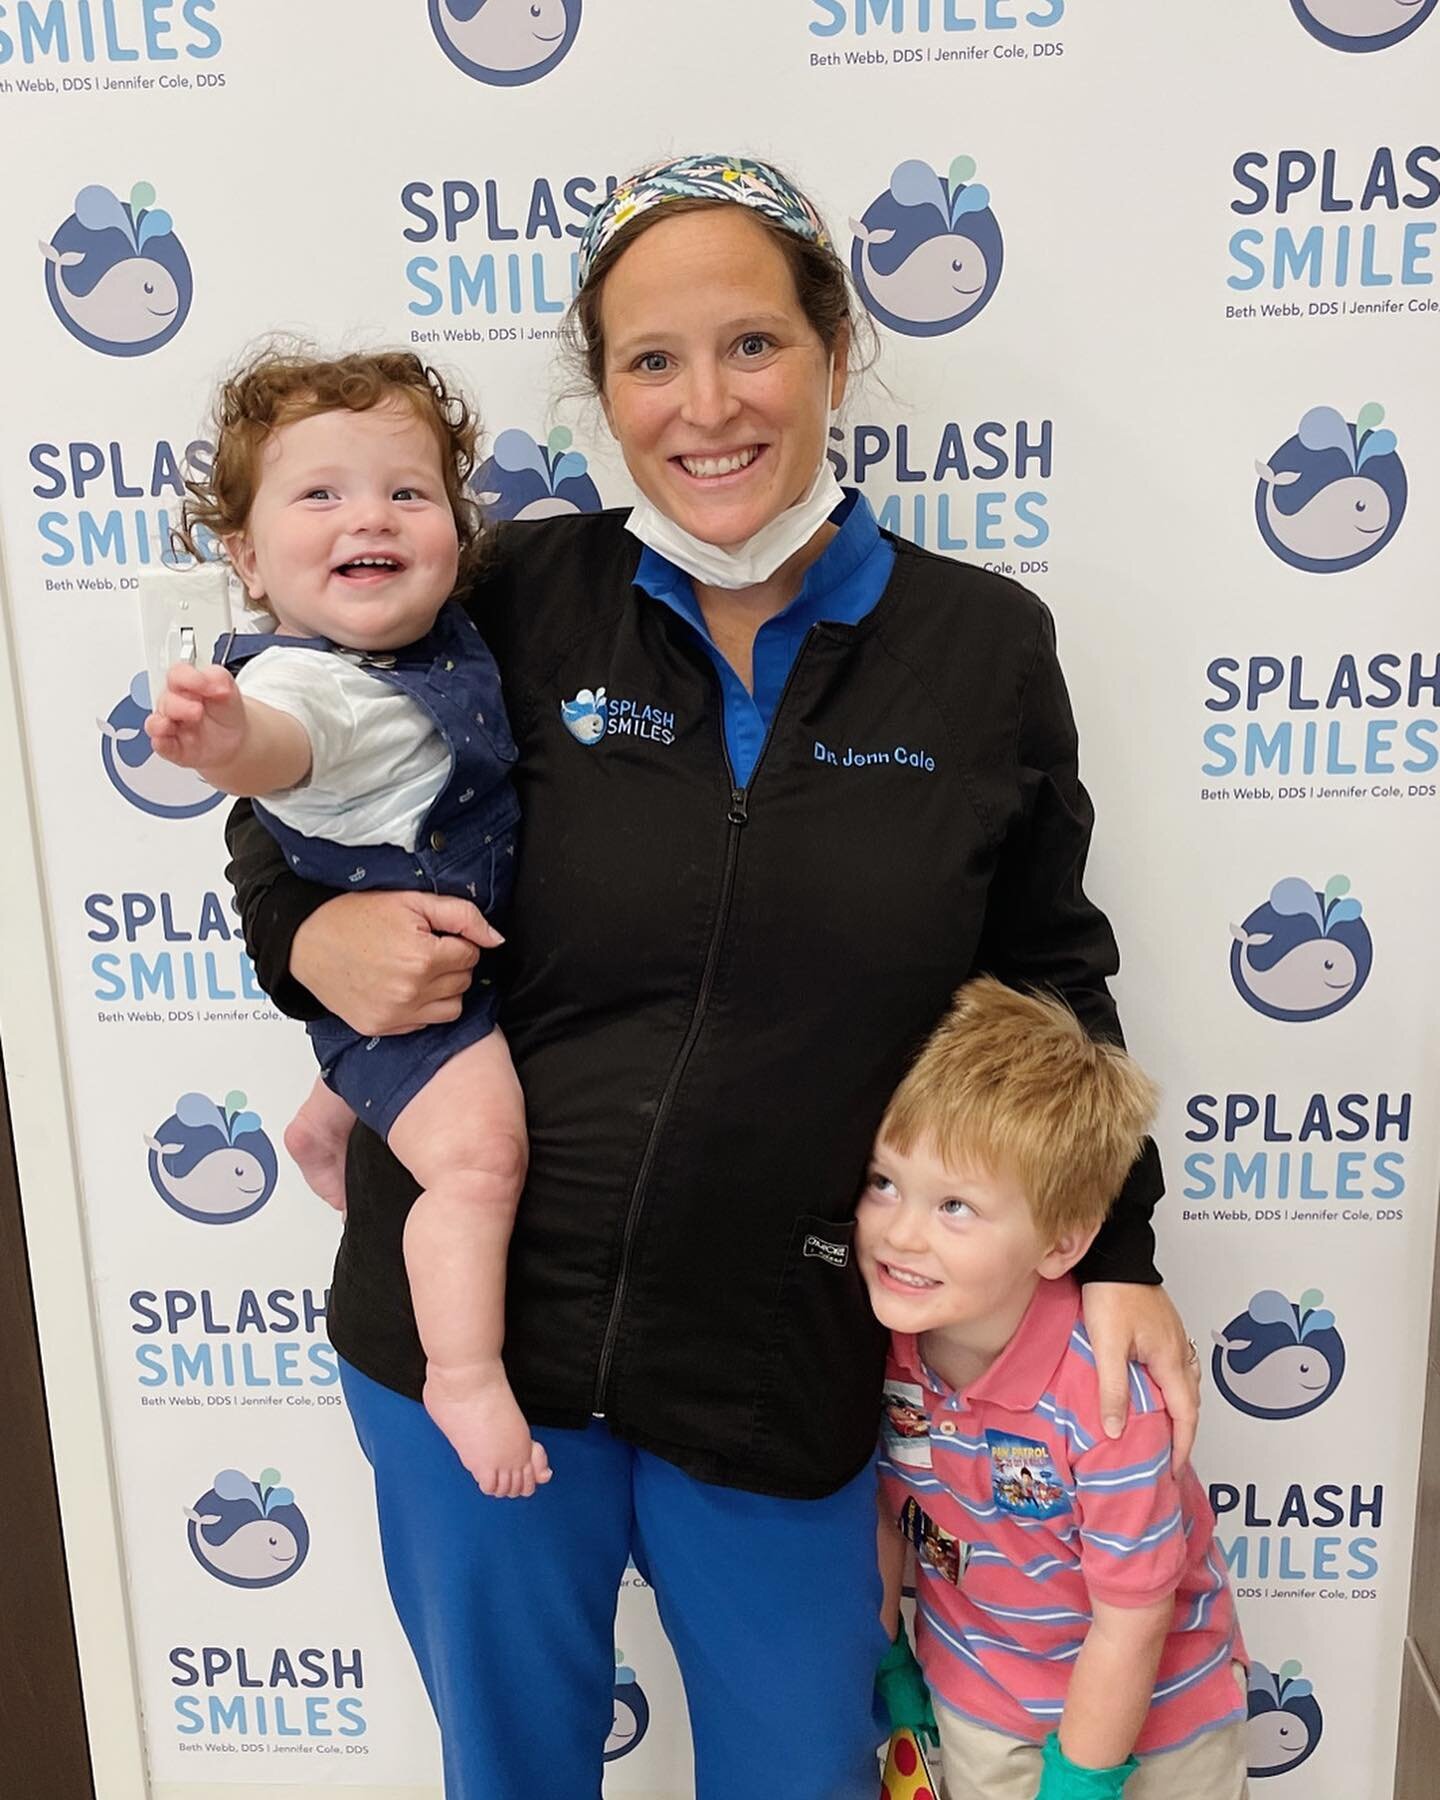 ⭐️PLEASE READ ⭐️ 

Helpful information about 1st dental visits! 

The American Academy of Pediatric Dentistry recommends the first dental visit to be by age 1 (or within 6 months of the first tooth 🦷 erupting). Here at Splash Smiles 🐳, during the f